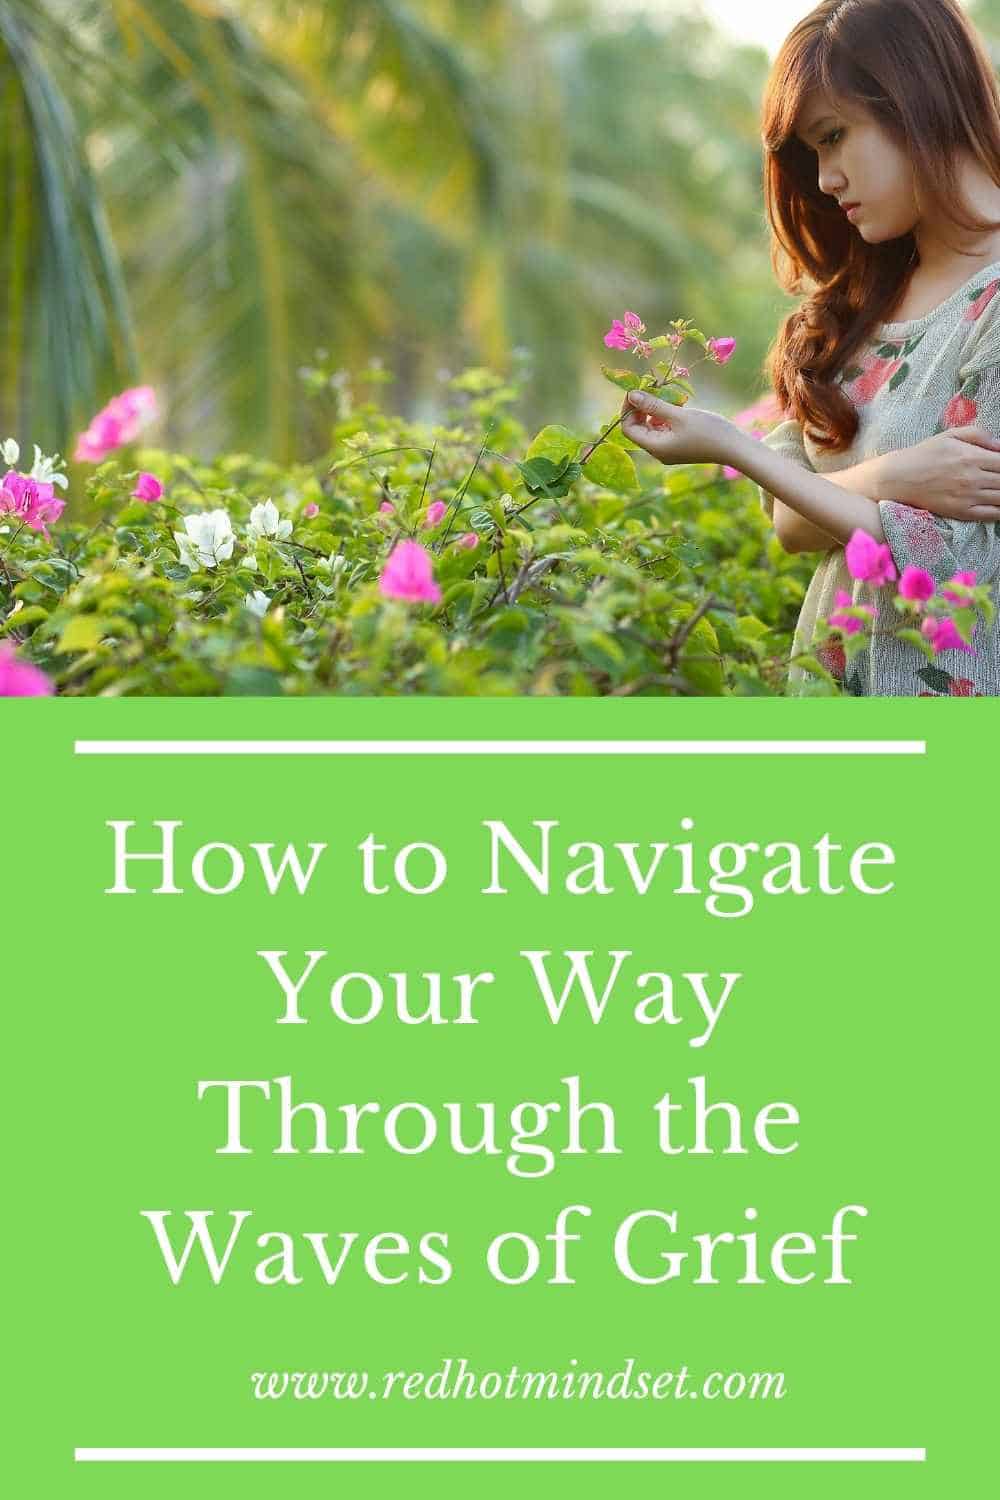 How to Navigate Your Way Through the Waves of Grief